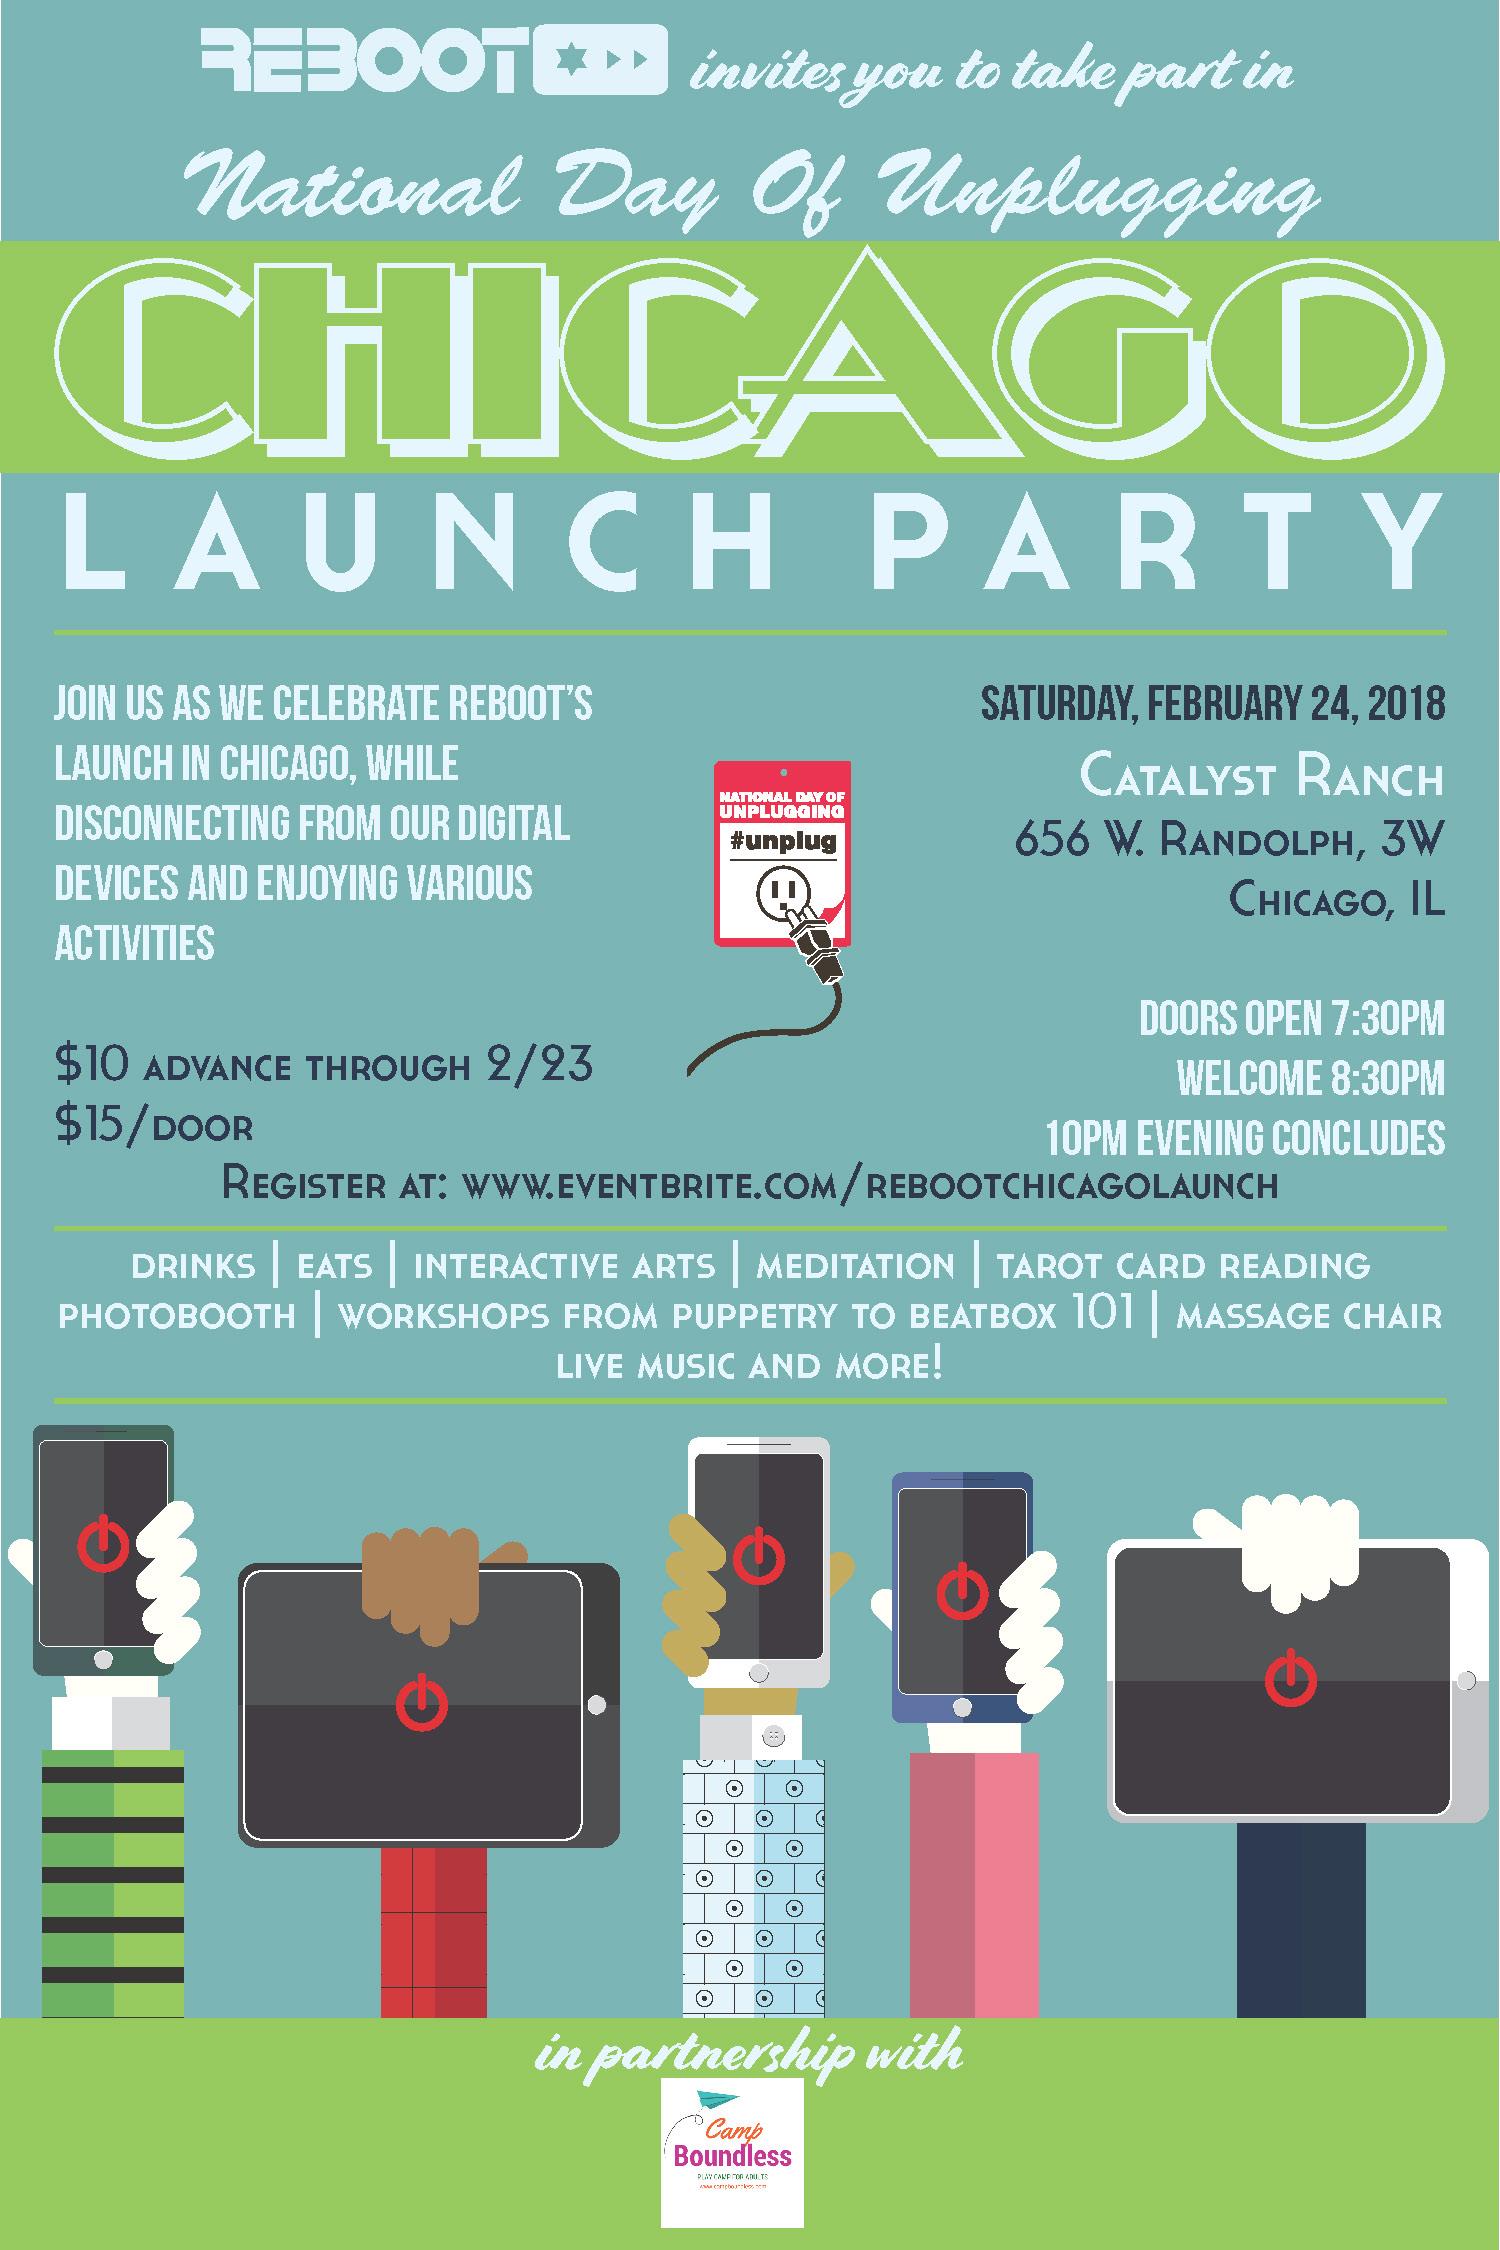 Reboot presents The National Day of Unplugging Chicago Launch Party